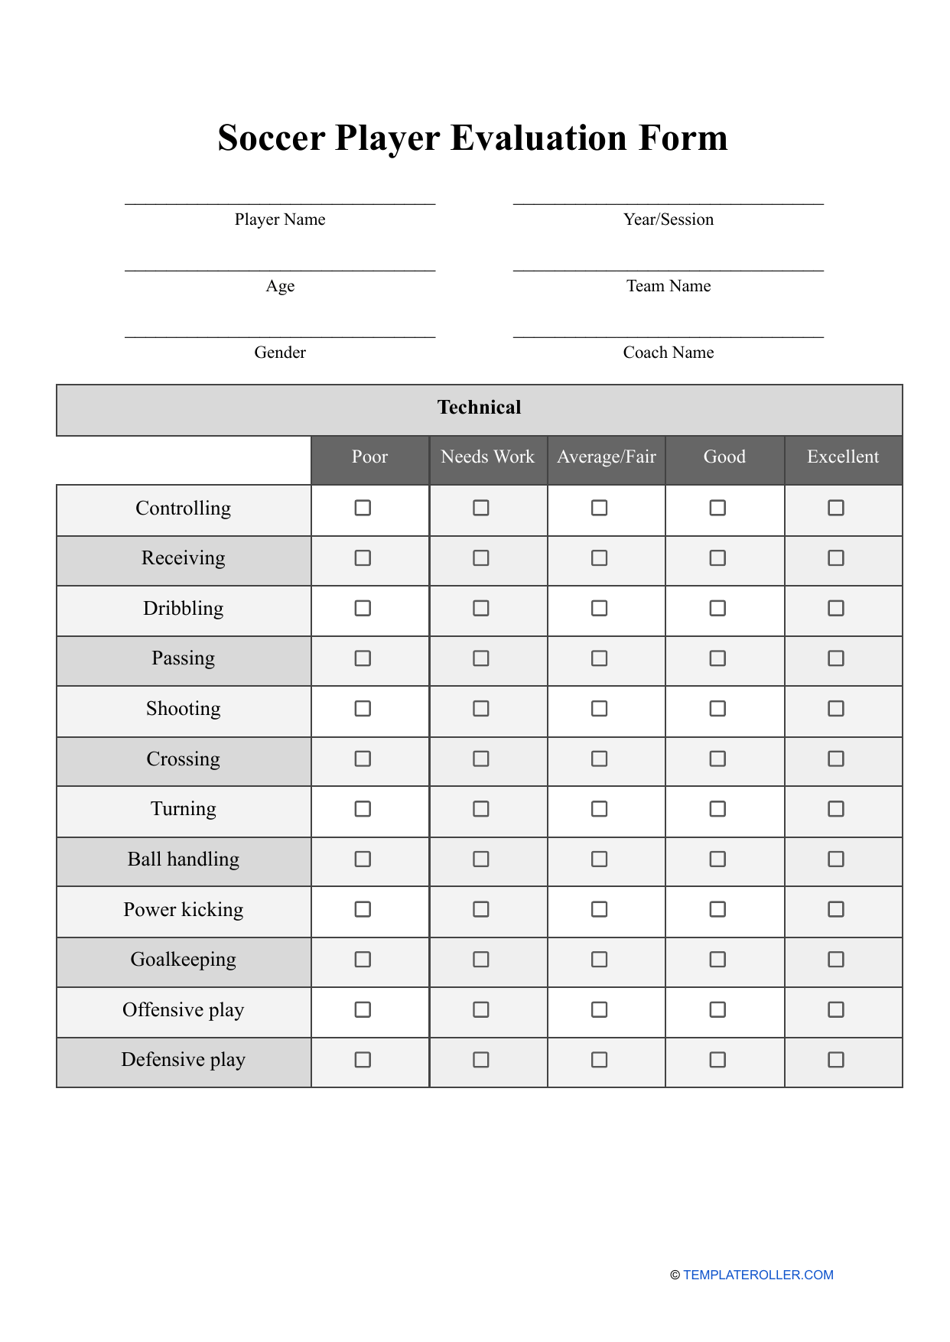 Soccer Player Evaluation Form Fill Out, Sign Online and Download PDF